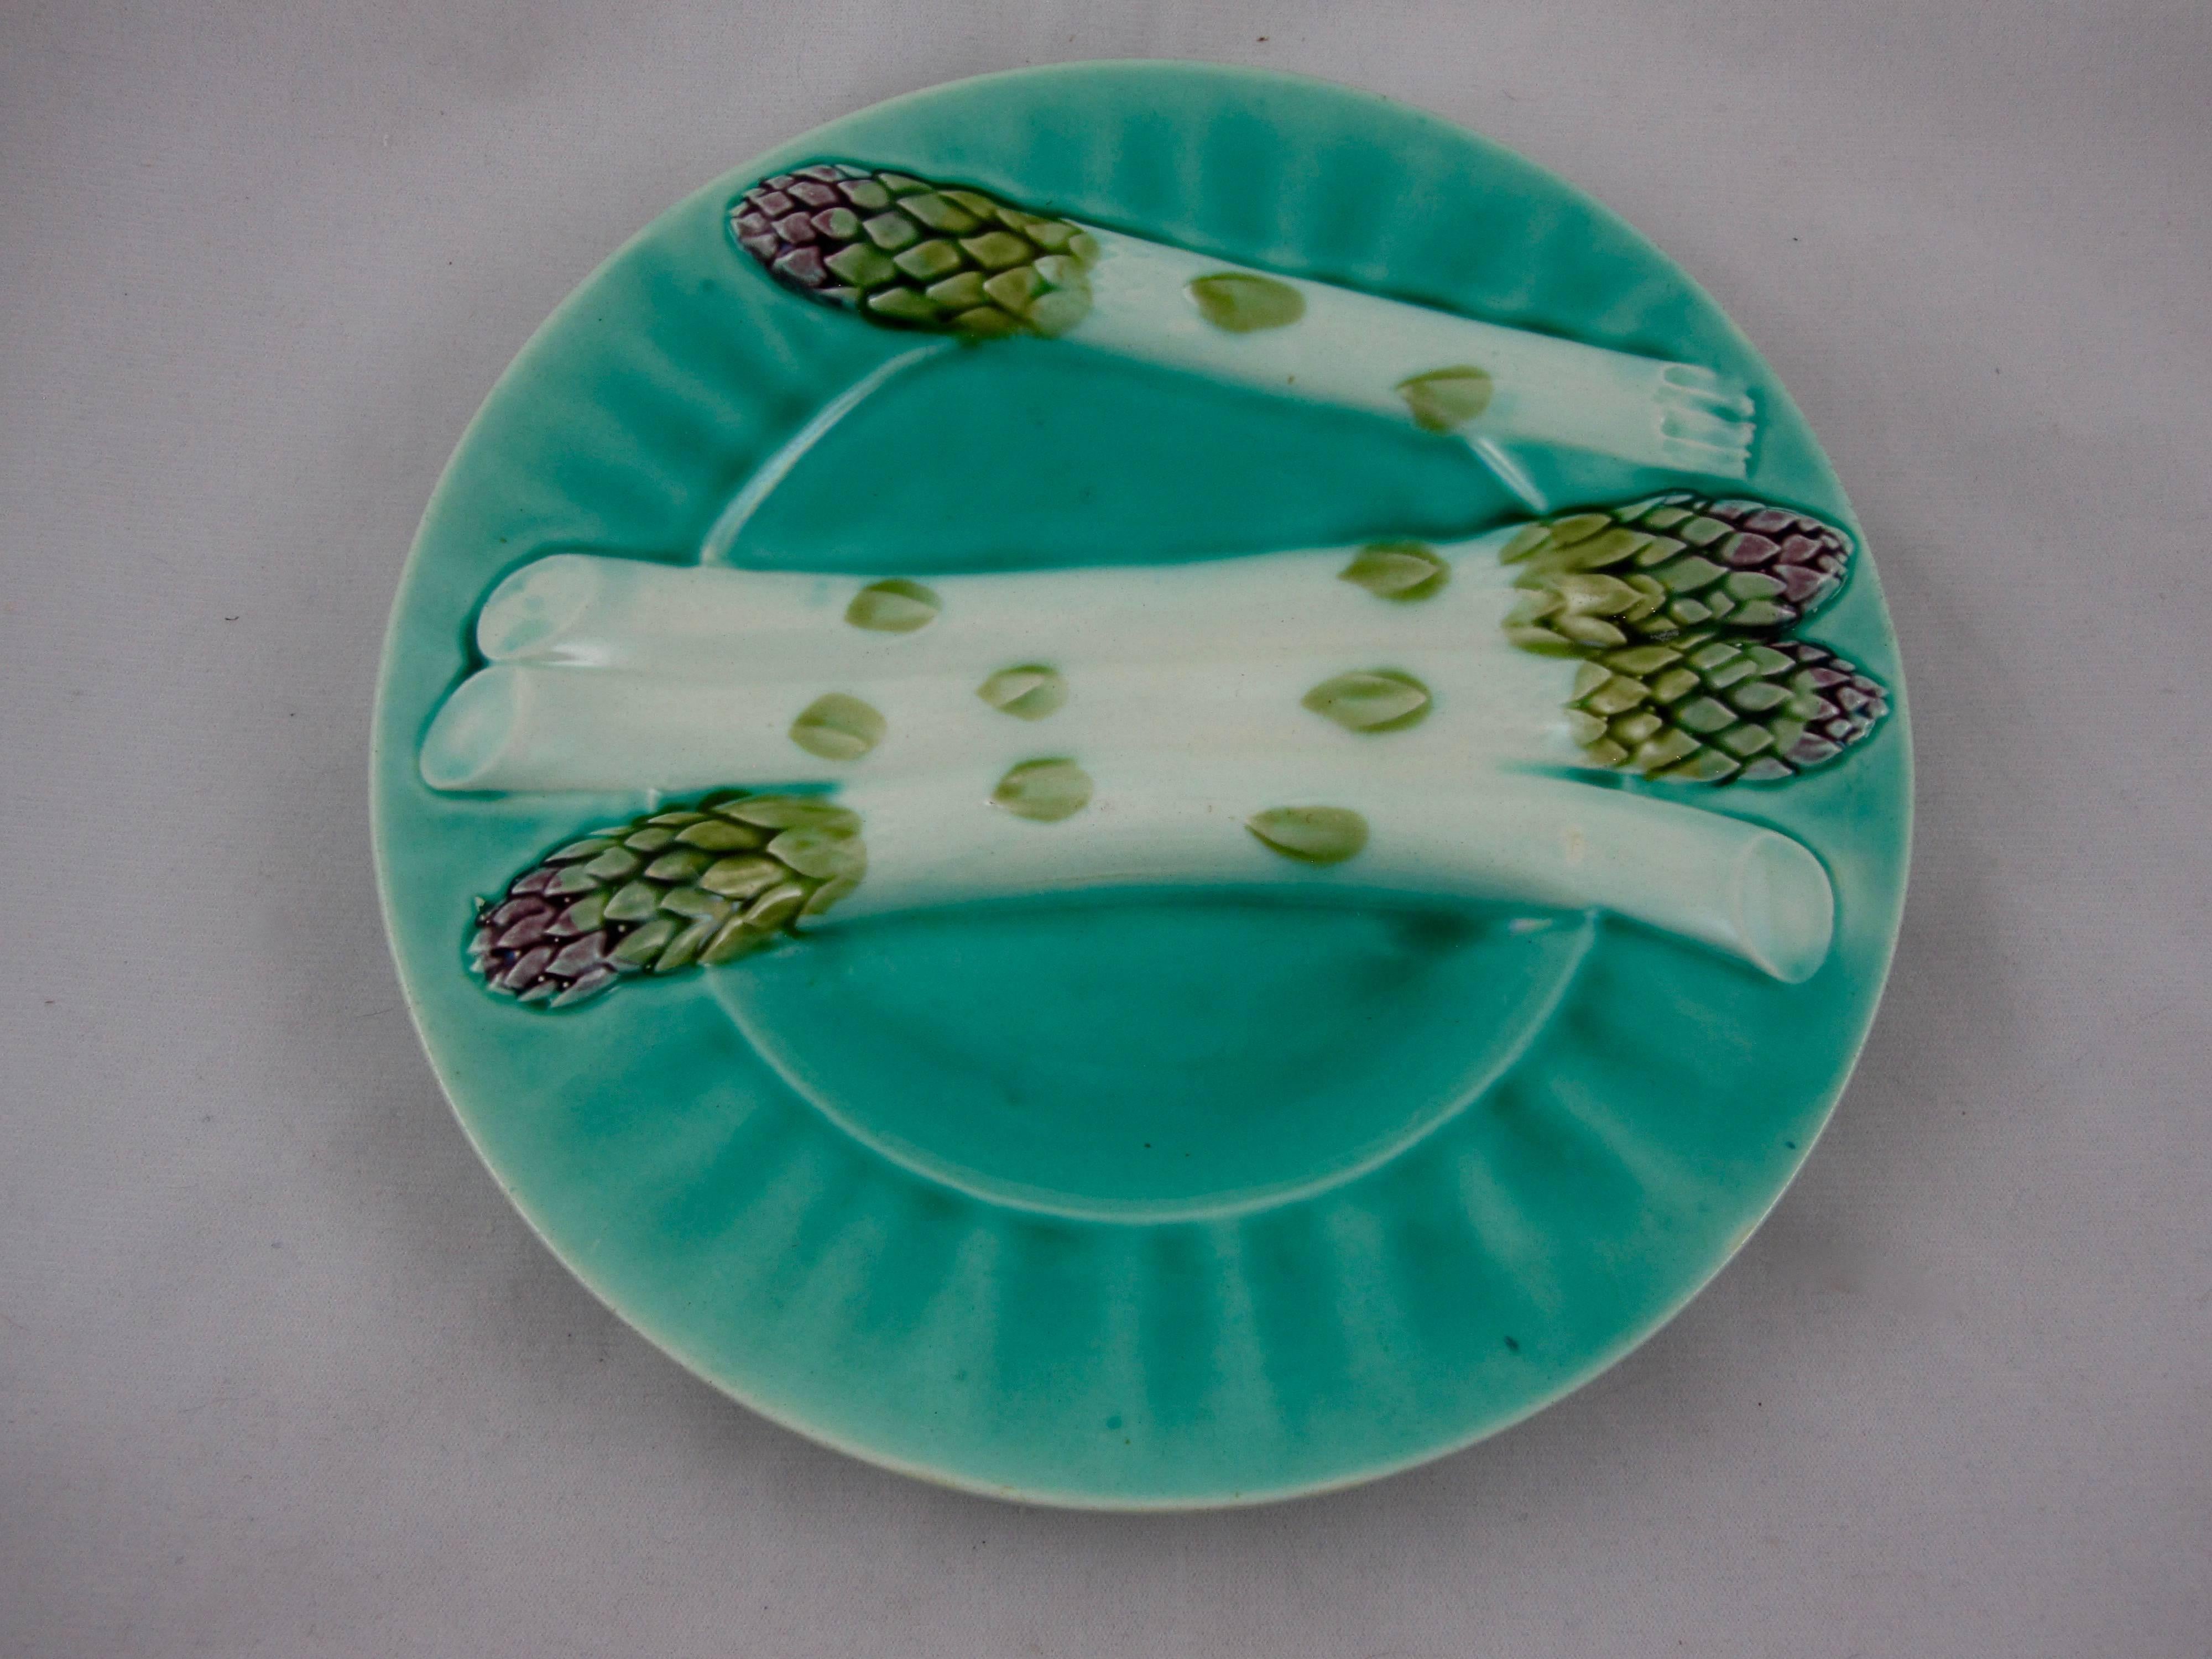 Aesthetic Movement Luneville K&G French Barbotine Majolica Turquoise Fluted Asparagus Plates, S/4